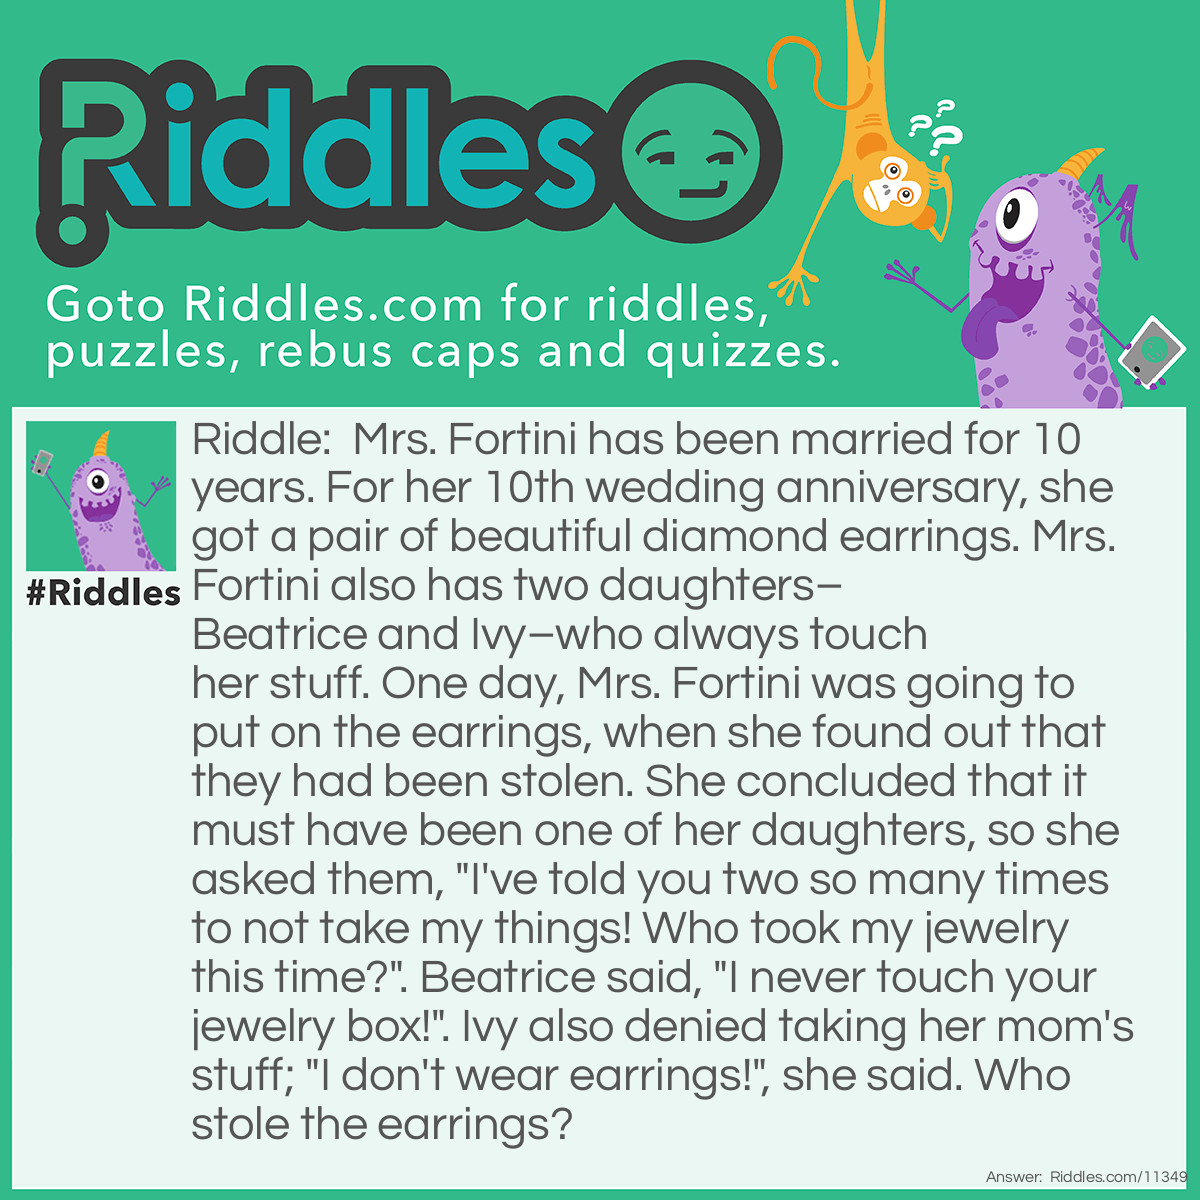 Riddle: Mrs. Fortini has been married for 10 years. For her 10th wedding anniversary, she got a pair of beautiful diamond earrings. Mrs. Fortini also has two daughters–Beatrice and Ivy–who always touch her stuff. One day, Mrs. Fortini was going to put on the earrings, when she found out that they had been stolen. She concluded that it must have been one of her daughters, so she asked them, "I've told you two so many times to not take my things! Who took my jewelry this time?". Beatrice said, "I never touch your jewelry box!". Ivy also denied taking her mom's stuff; "I don't wear earrings!", she said. Who stole the earrings? Answer: It was Ivy who stole the earrings. Her mother didn't specify which piece of jewelry was missing.